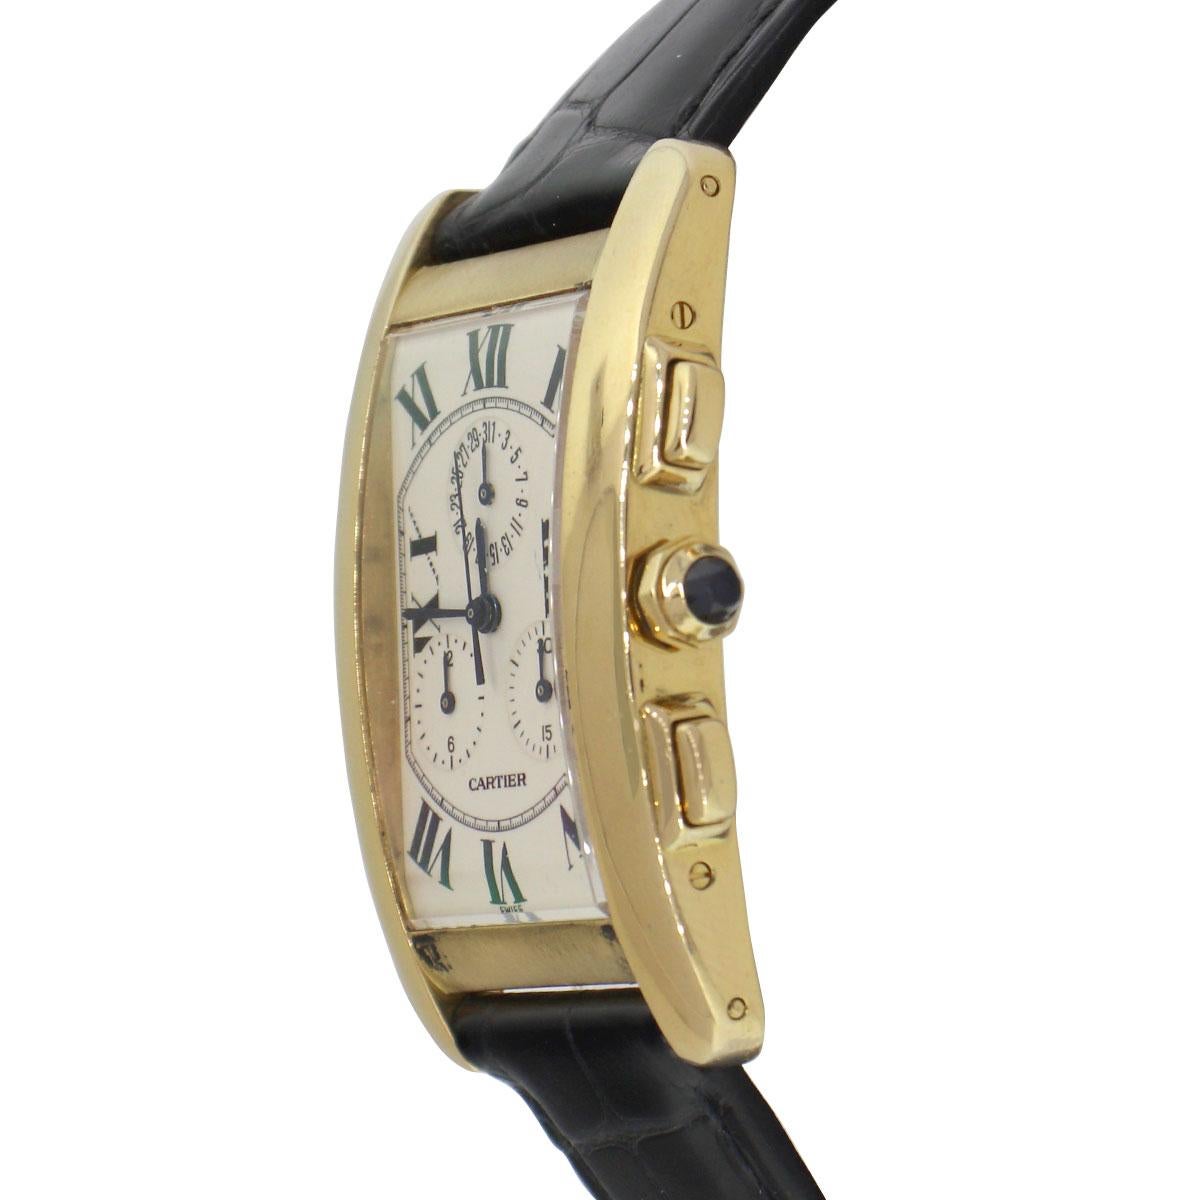 Brand: Cartier
Model: Tank Americaine
Case Material: 18k Yellow Gold
Case Diameter: 41mm
Crystal: Sapphire
Bezel: Smooth, Fixed 18k Yellow Gold Bezel
Dial: White Dial, Roman numeral markers; with blue hands
Bracelet: Black leather two piece